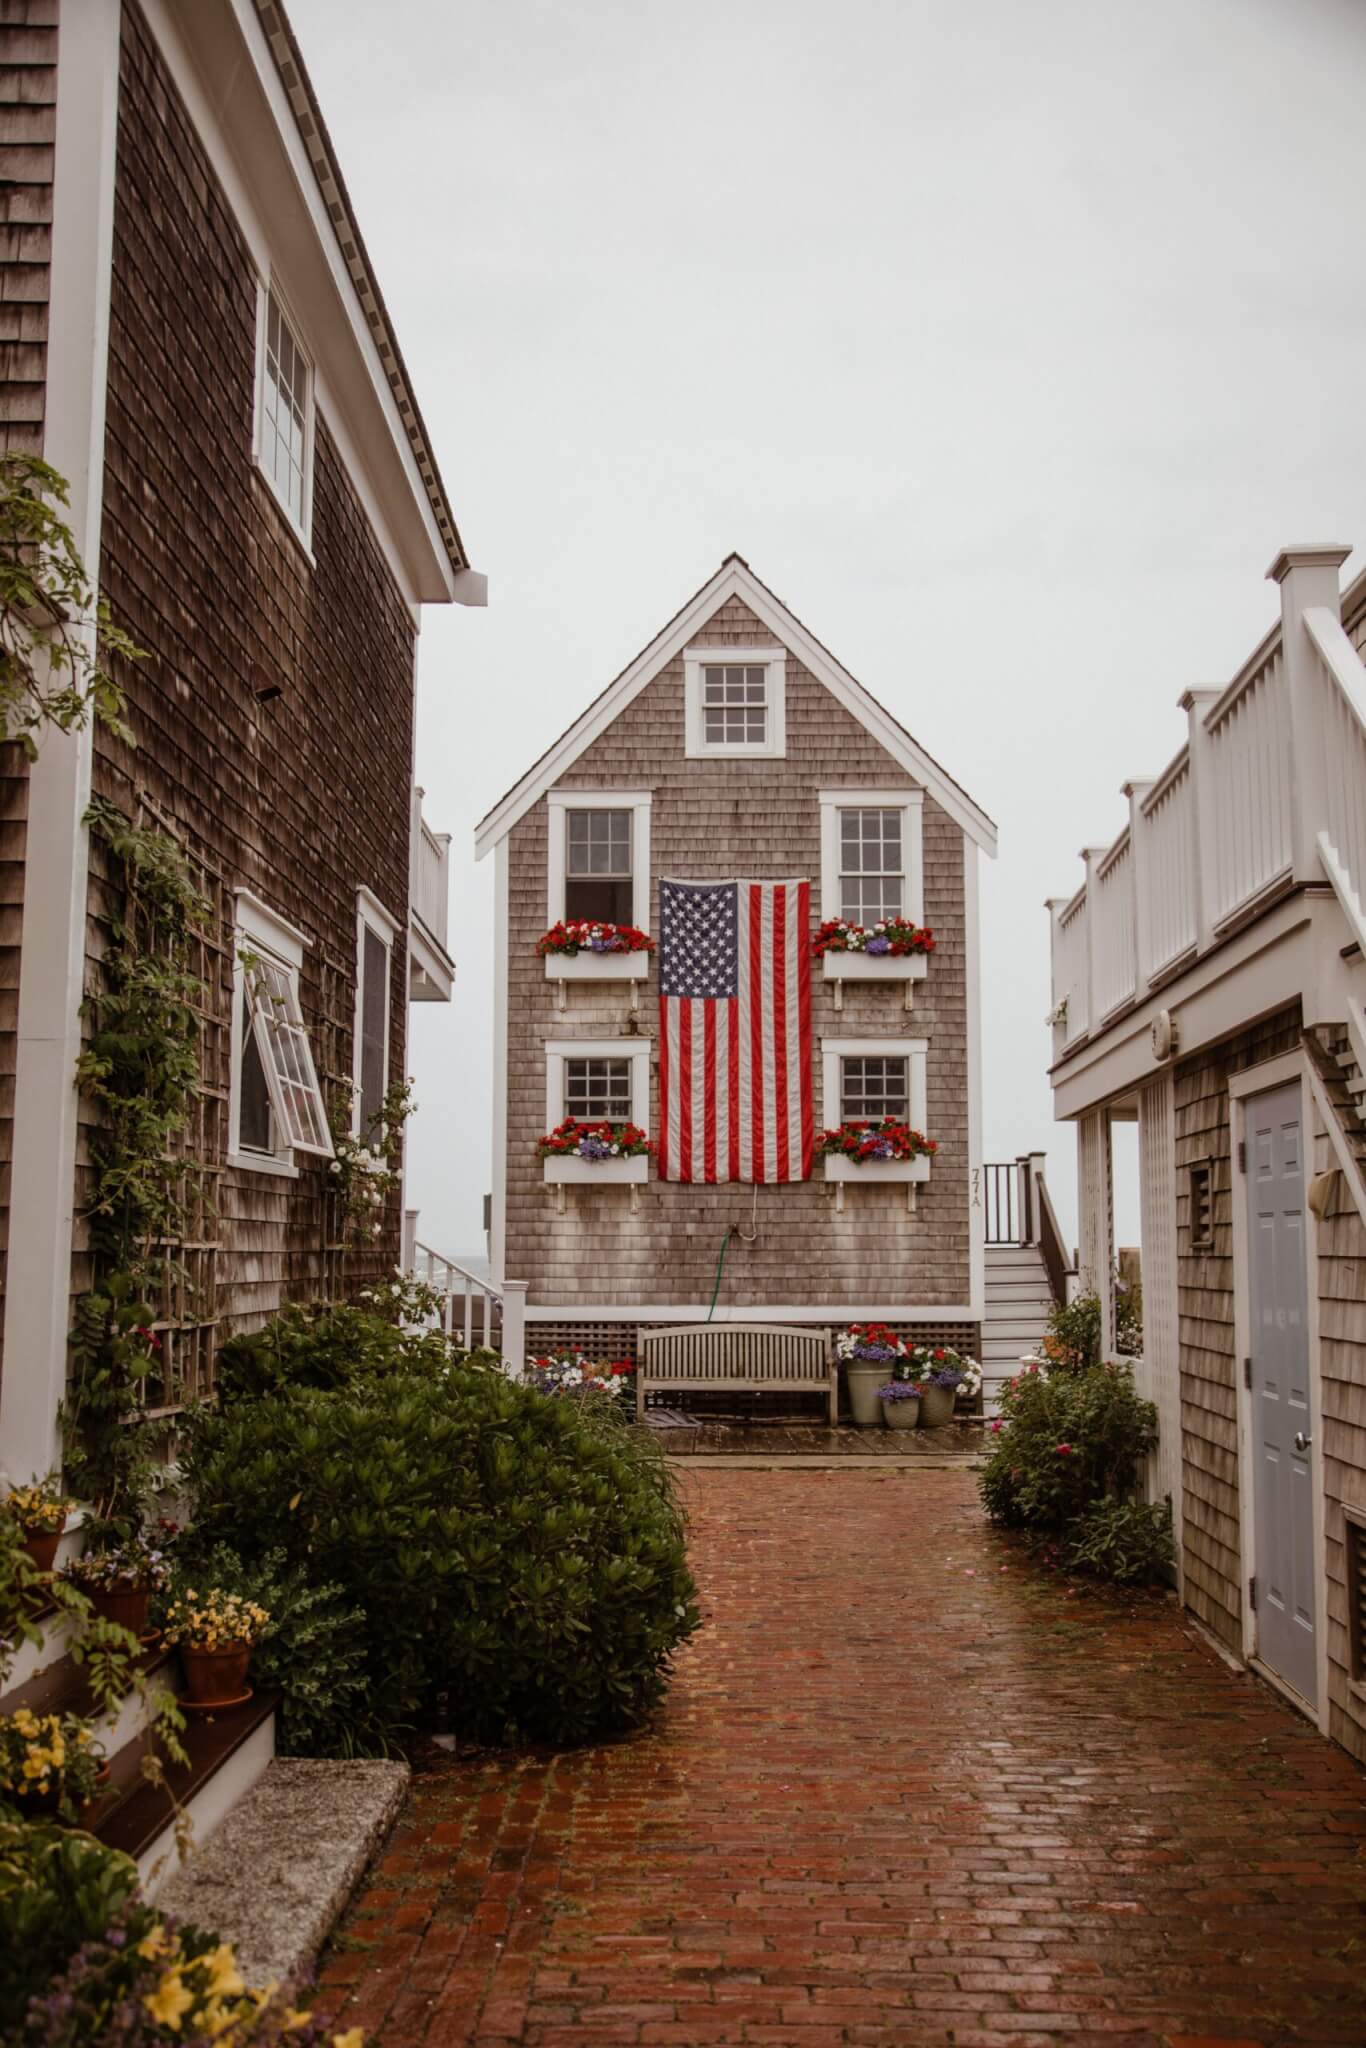 A home in Provincetown, Massachusetts